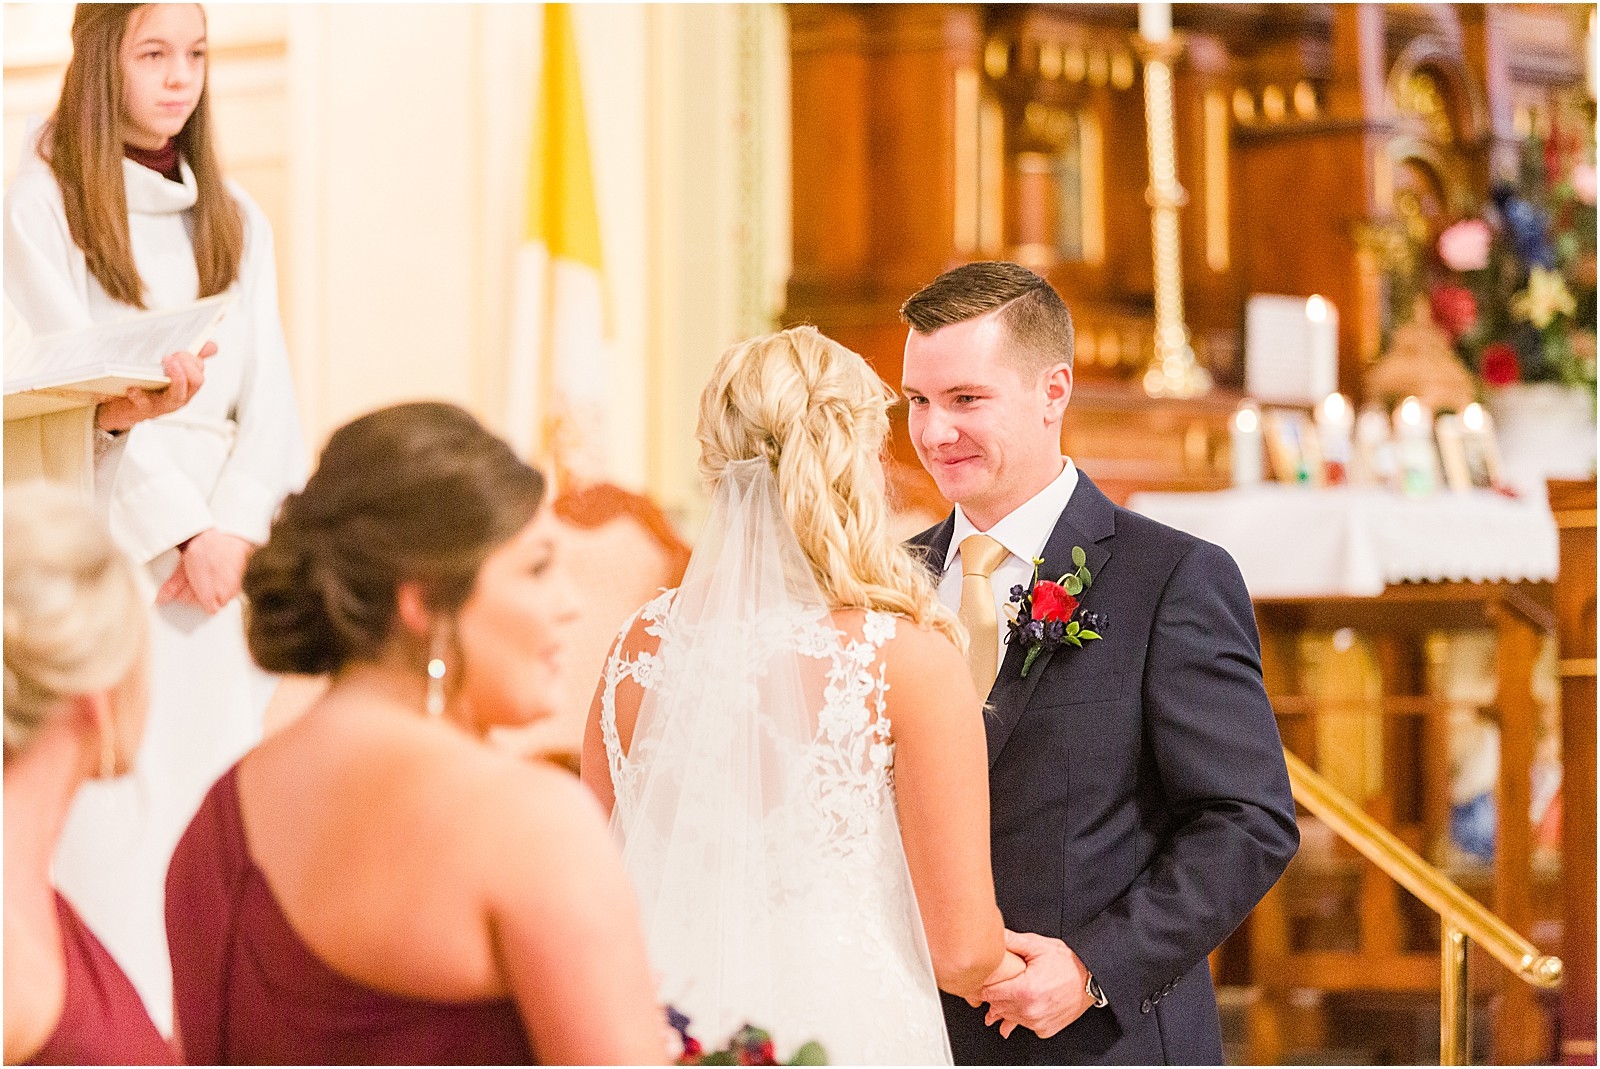 Haylee and Dillon's Evansville, Indiana wedding by Bret and Brandie Photography.0057.jpg